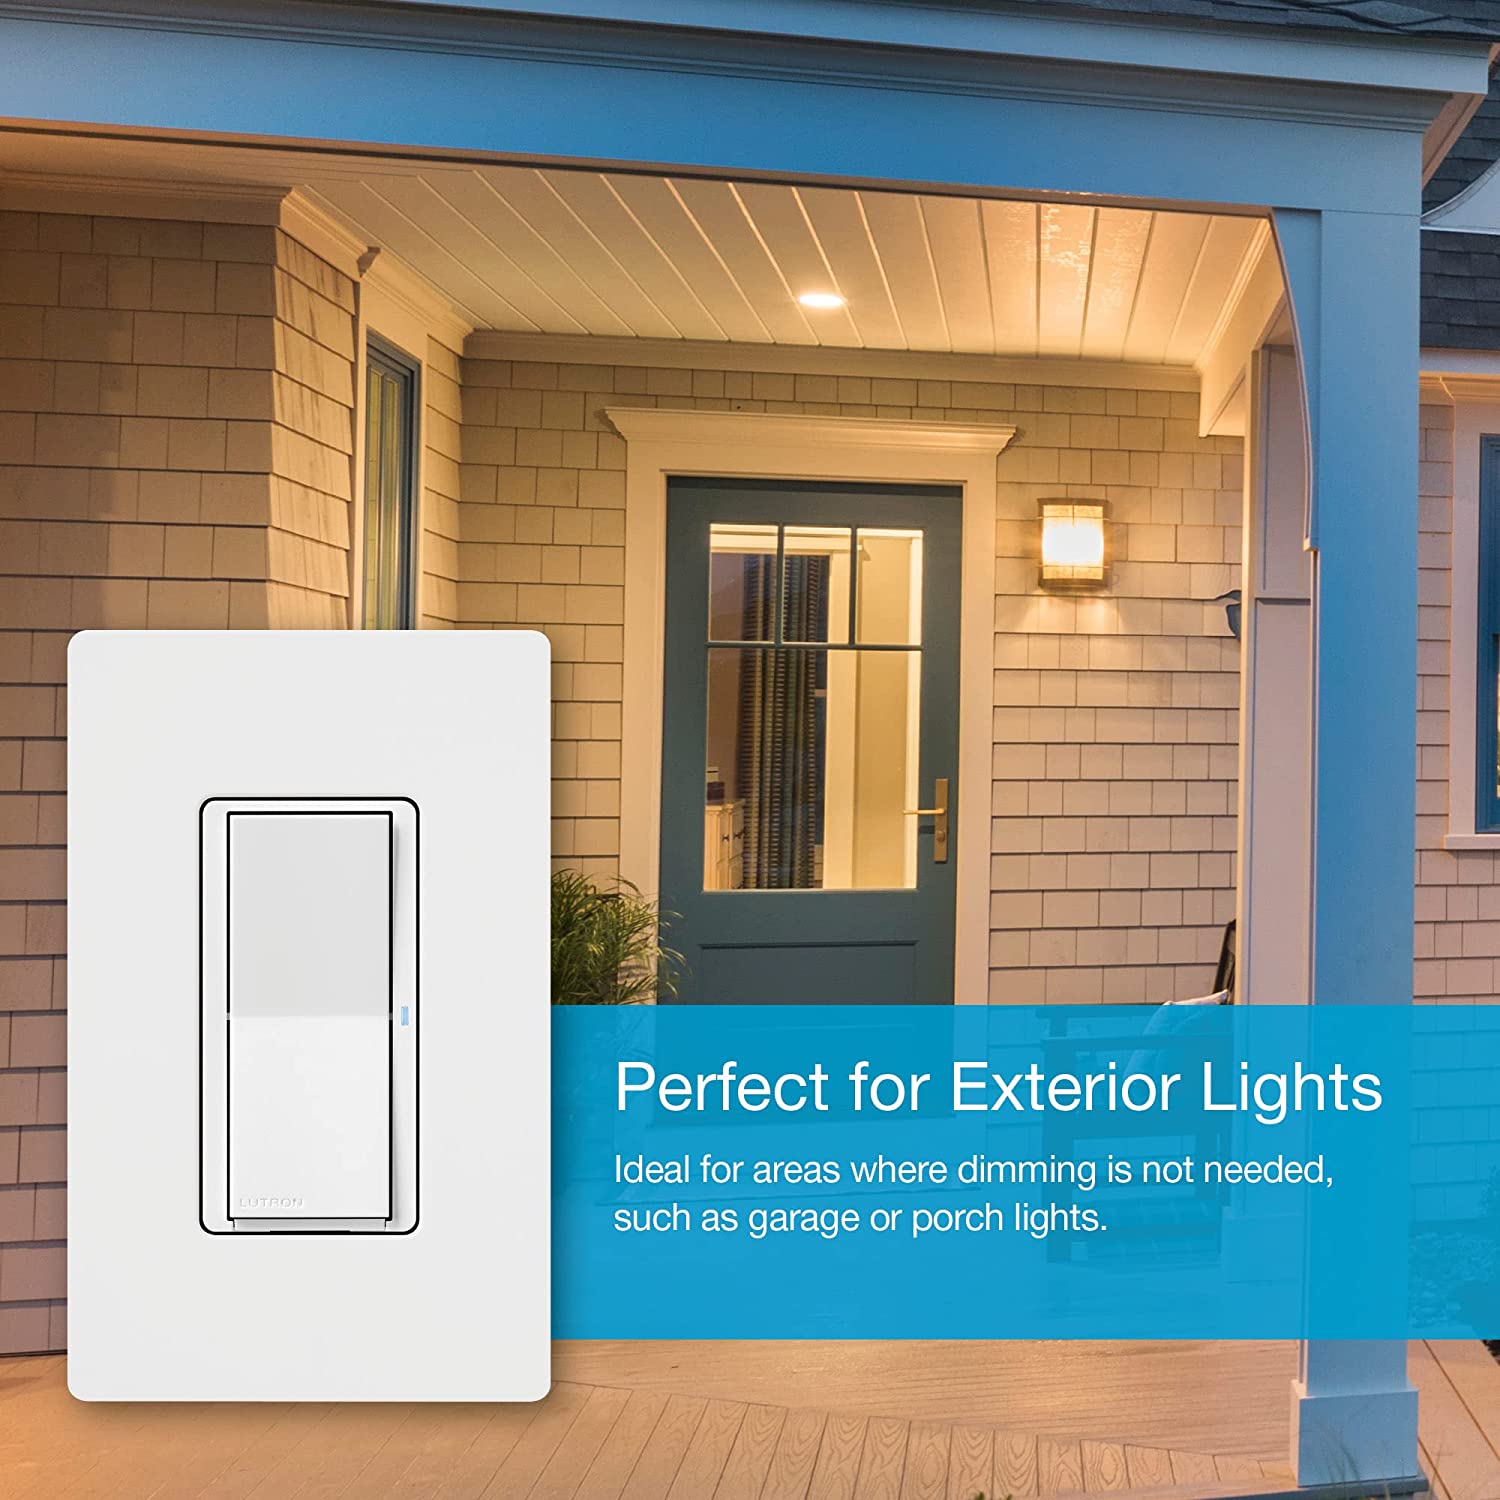 Lutron Claro Smart Switch with Wallplate for Caséta Smart Lighting, for On/Off Control of Lights or Fans | Neutral Wire Required | DVRFW-5NS-WH-A | White